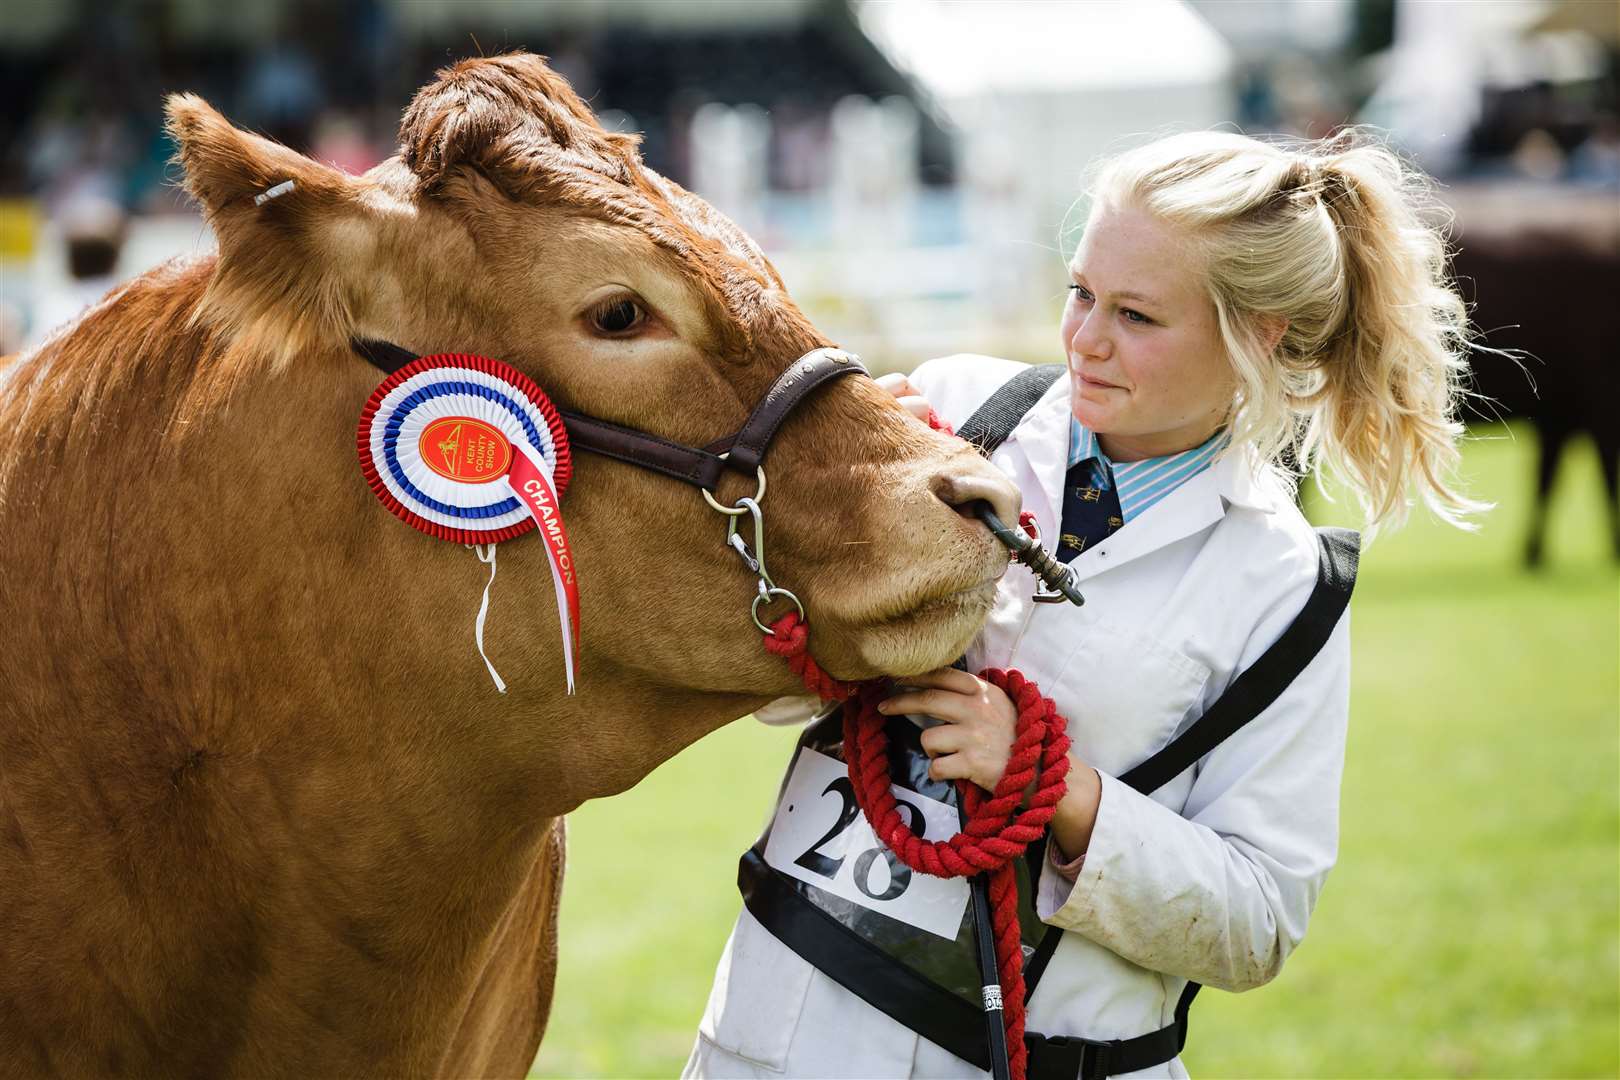 The Kent County Show is the region's showcase event for farming, agriculture and countryside life and returns this year. Picture: Thomas Alexander